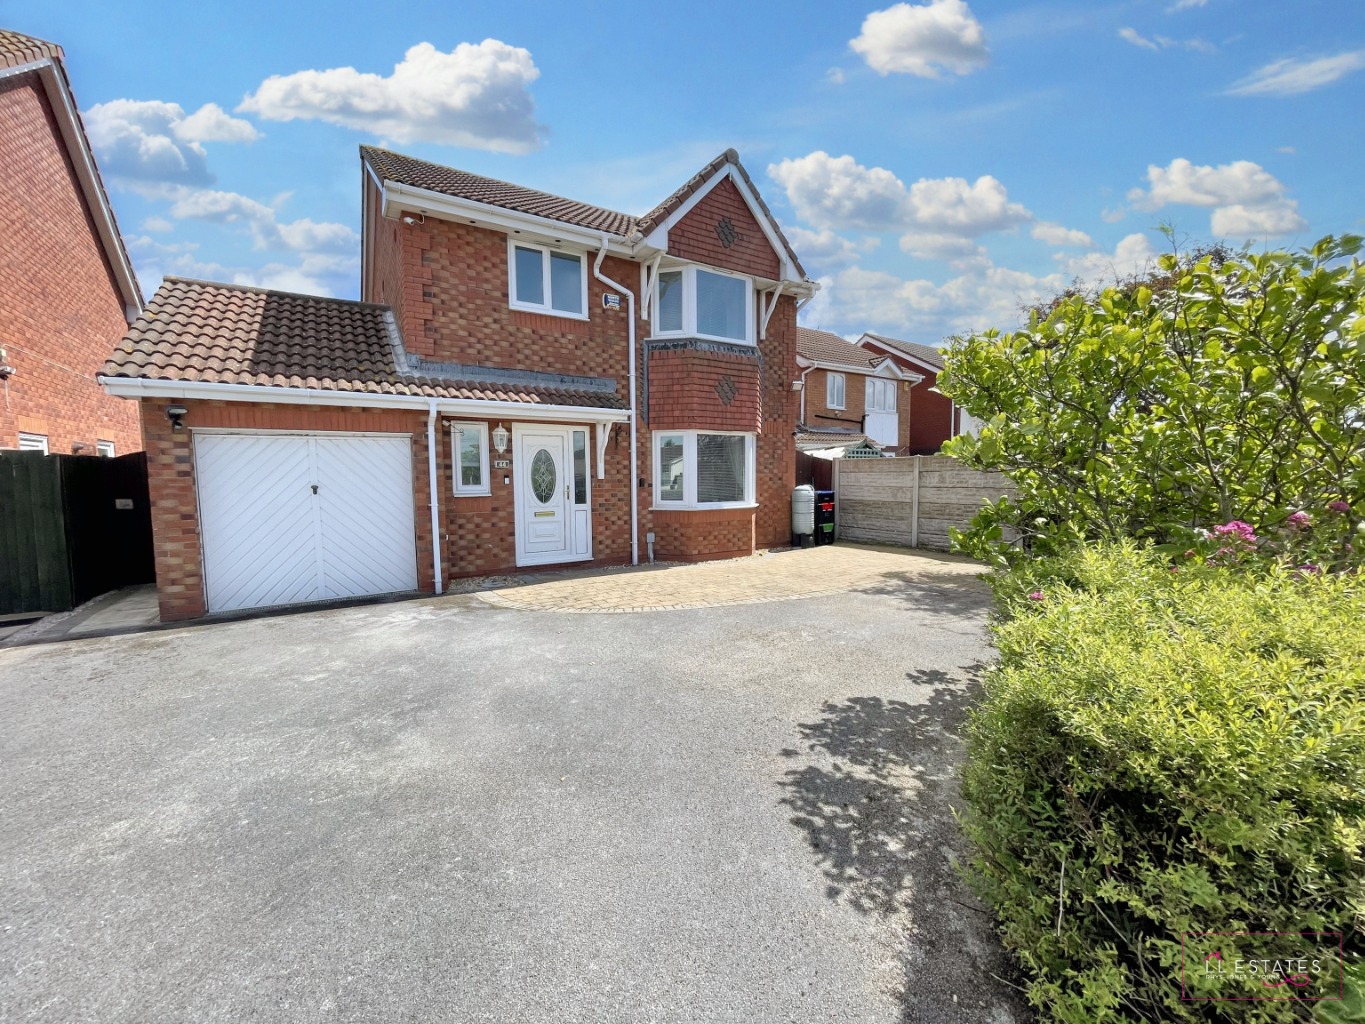 3 bed detached house for sale in Ffordd Anwyl, Rhyl - Property Image 1